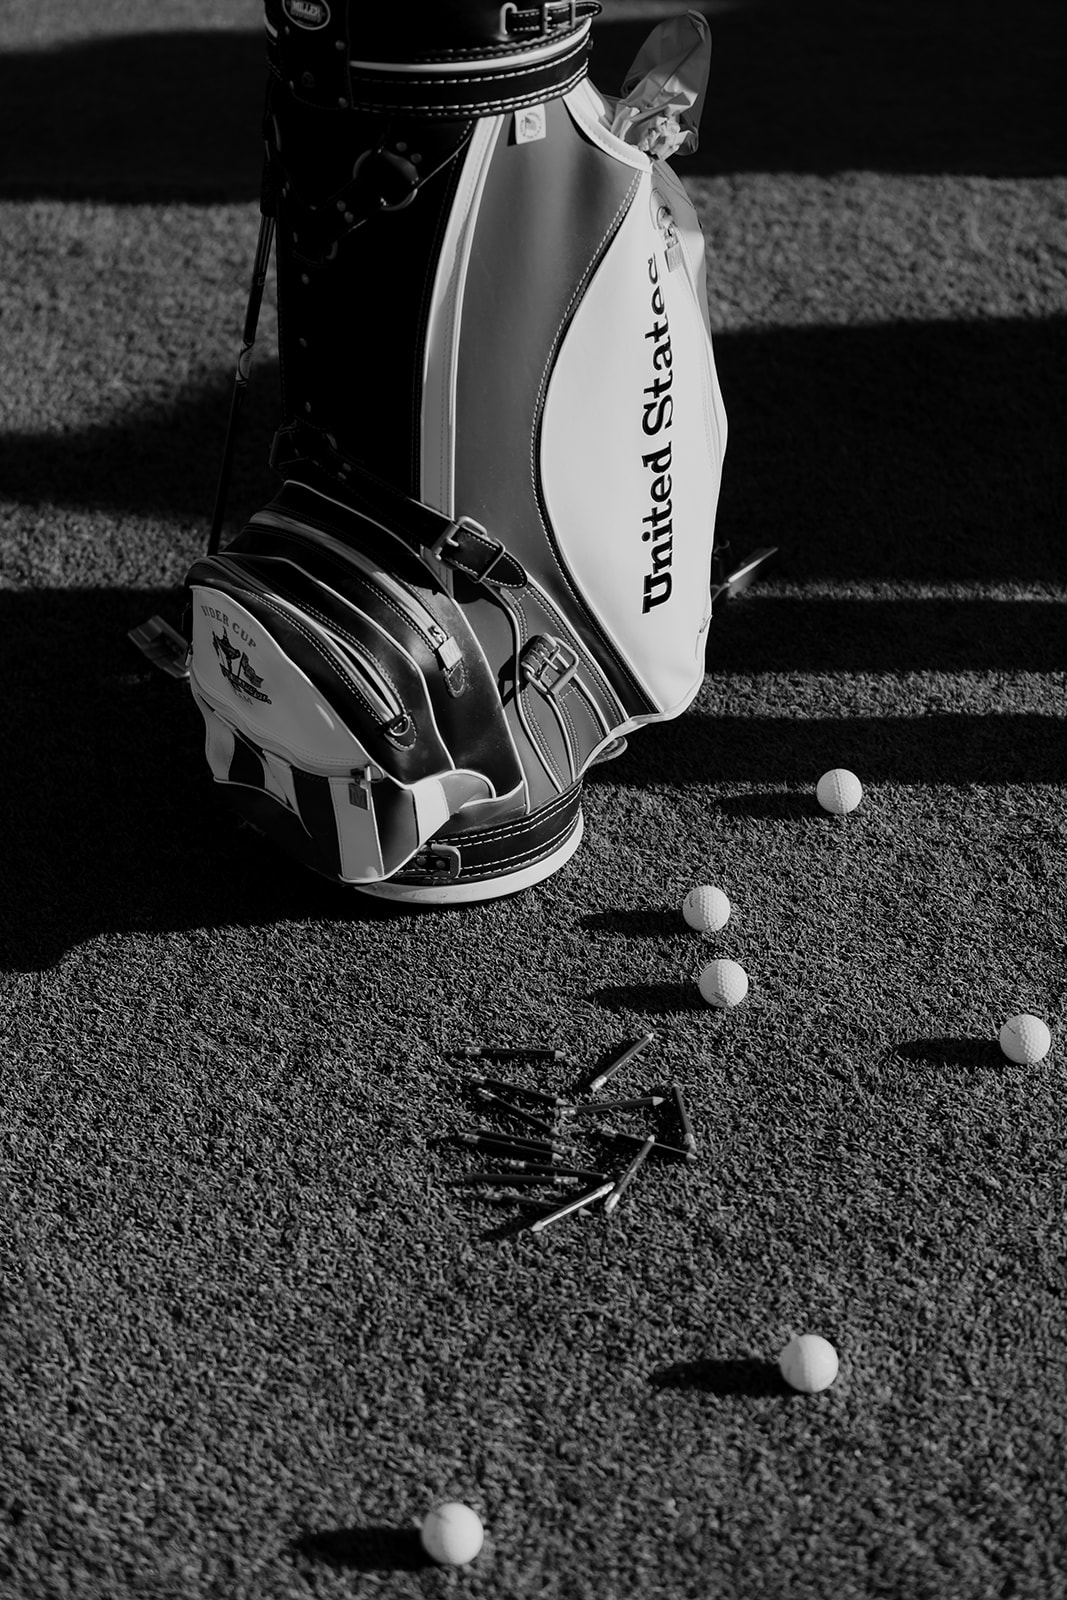 Black and white photo of golf bag with golf balls and tees on the floor.